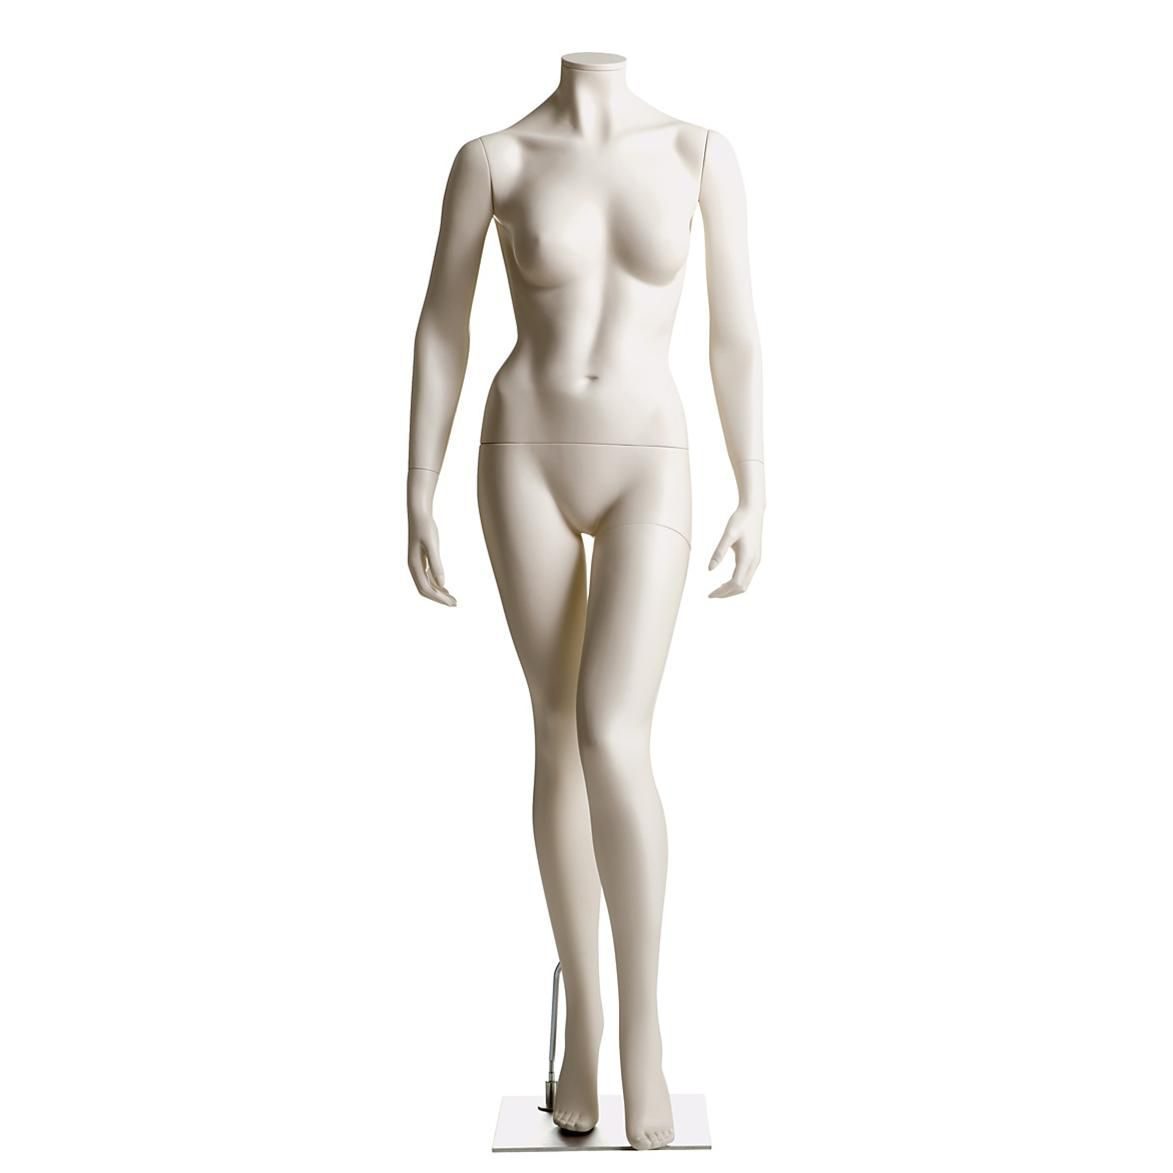 Buyers Guide - Mannequins 1